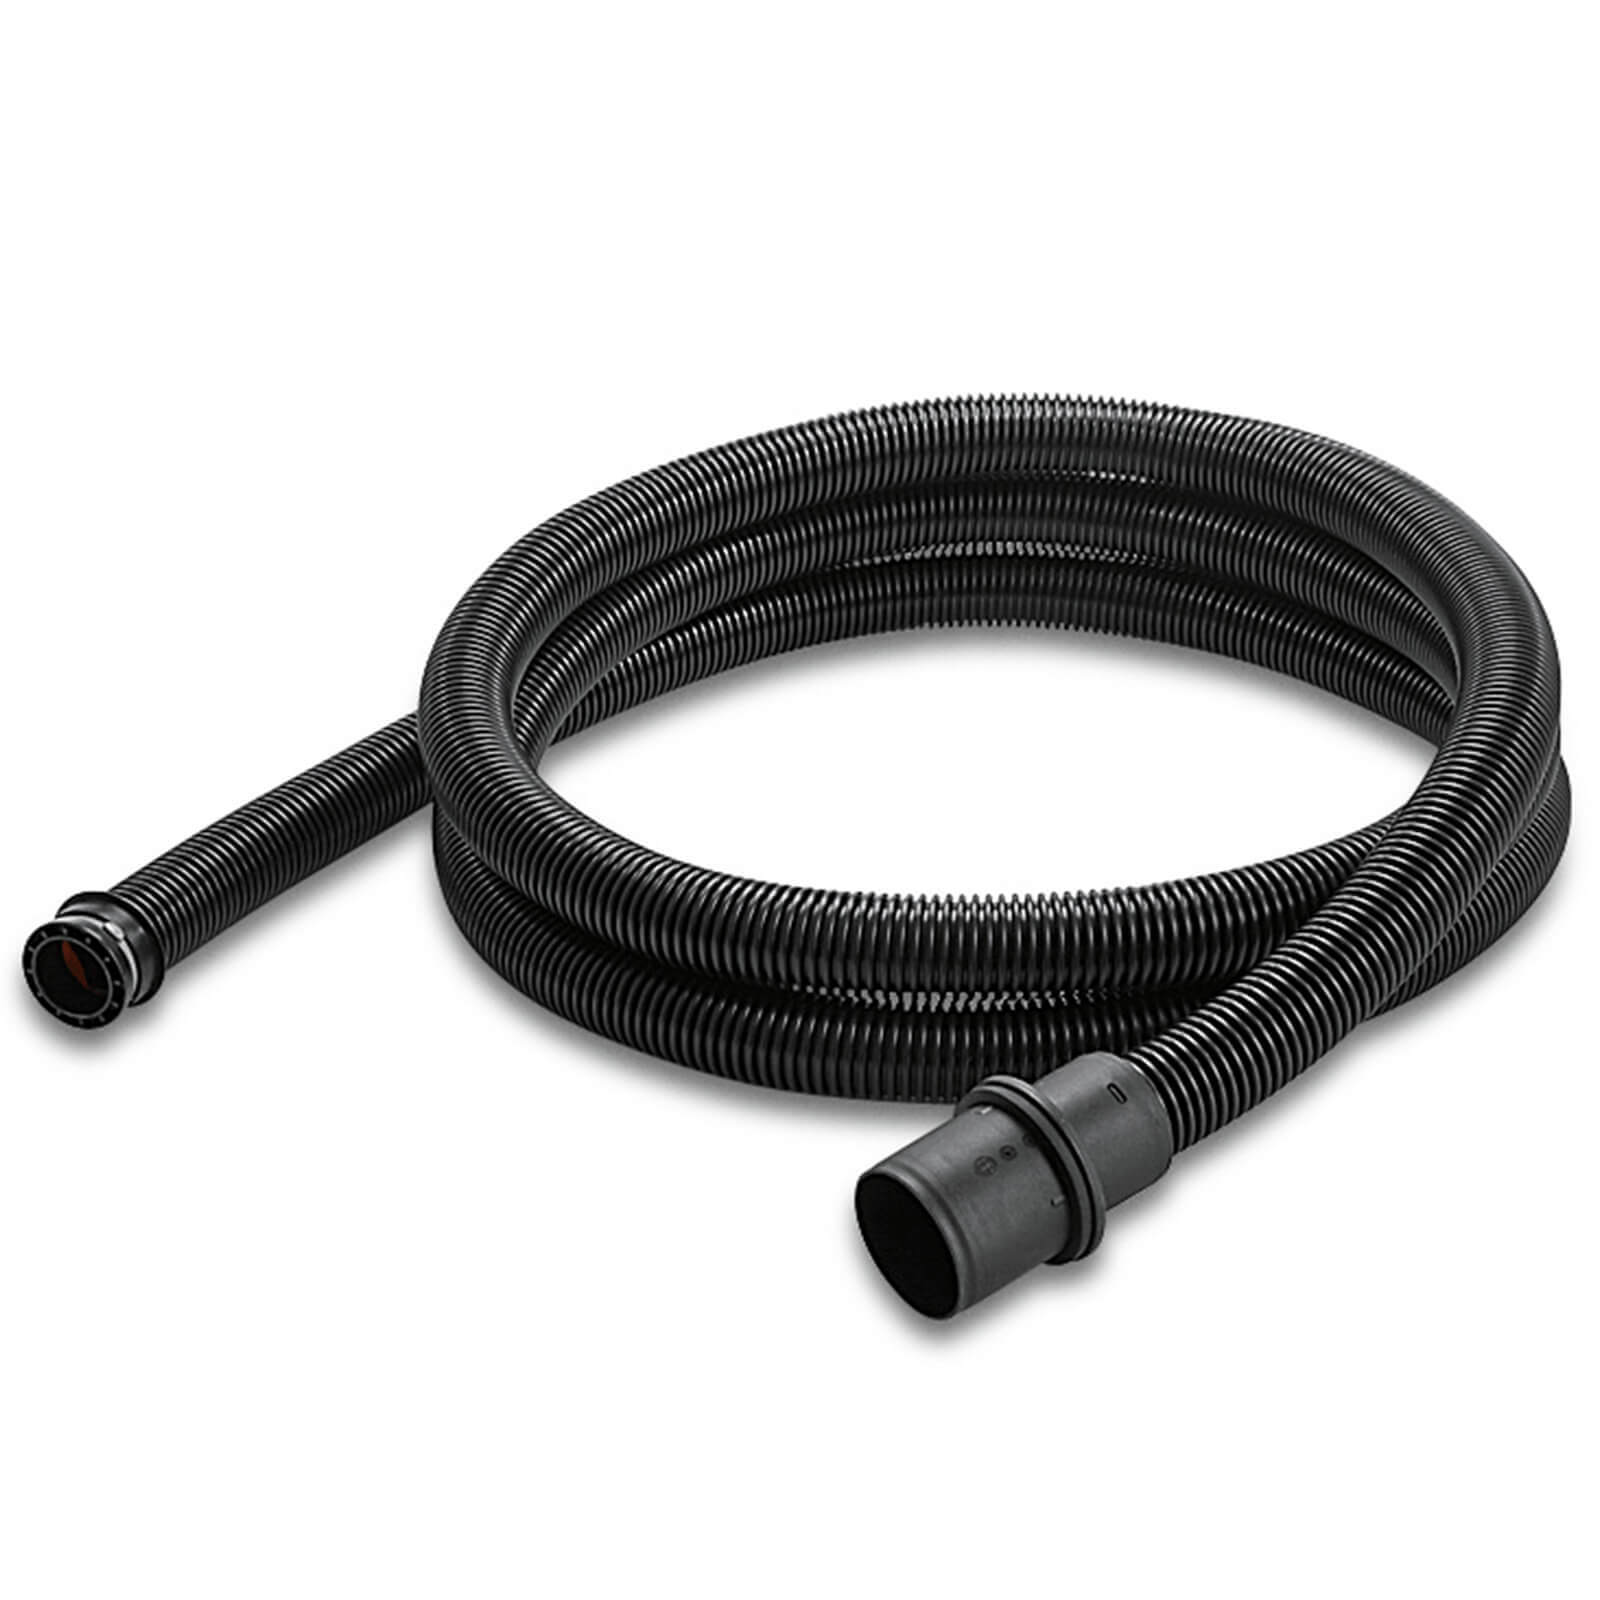 Image of Karcher Suction Hose for NT 27/1, 35/1, 45/1 and 48/1 Vacuum Cleaners 35mm 4m